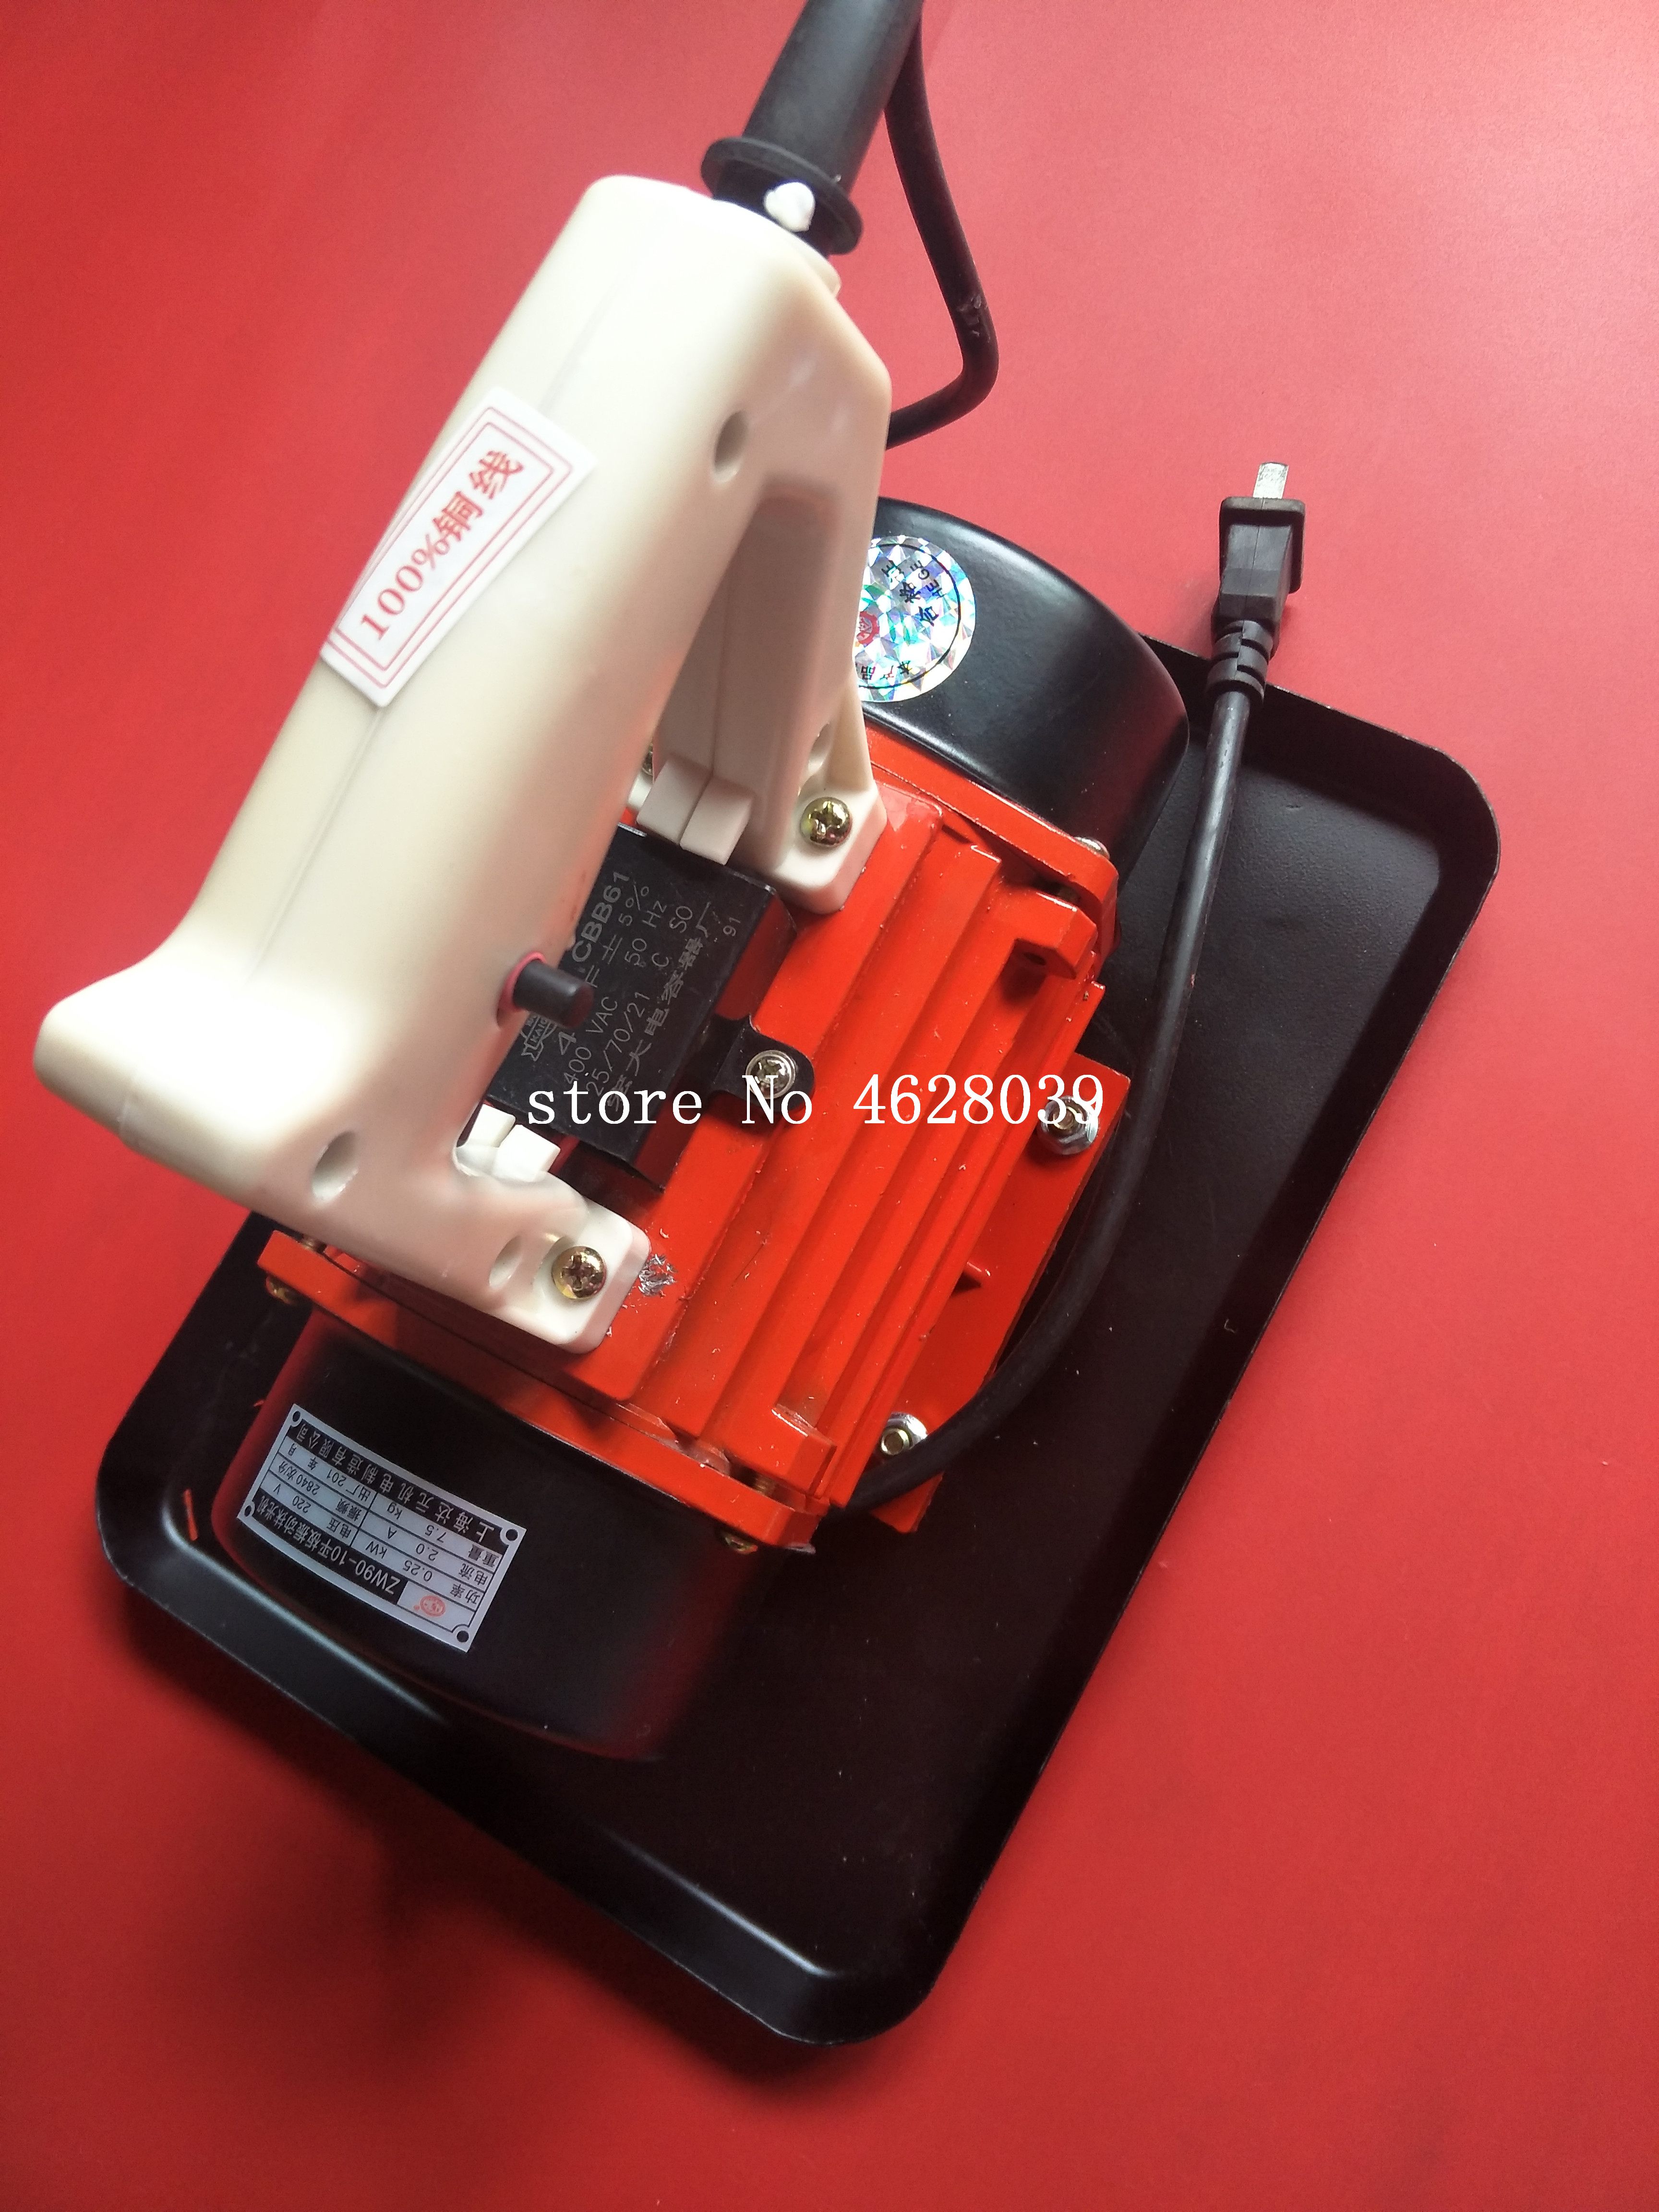 220V 250W Hand-held Cement Vibrating Troweling Concrete Vibrator Top Quality